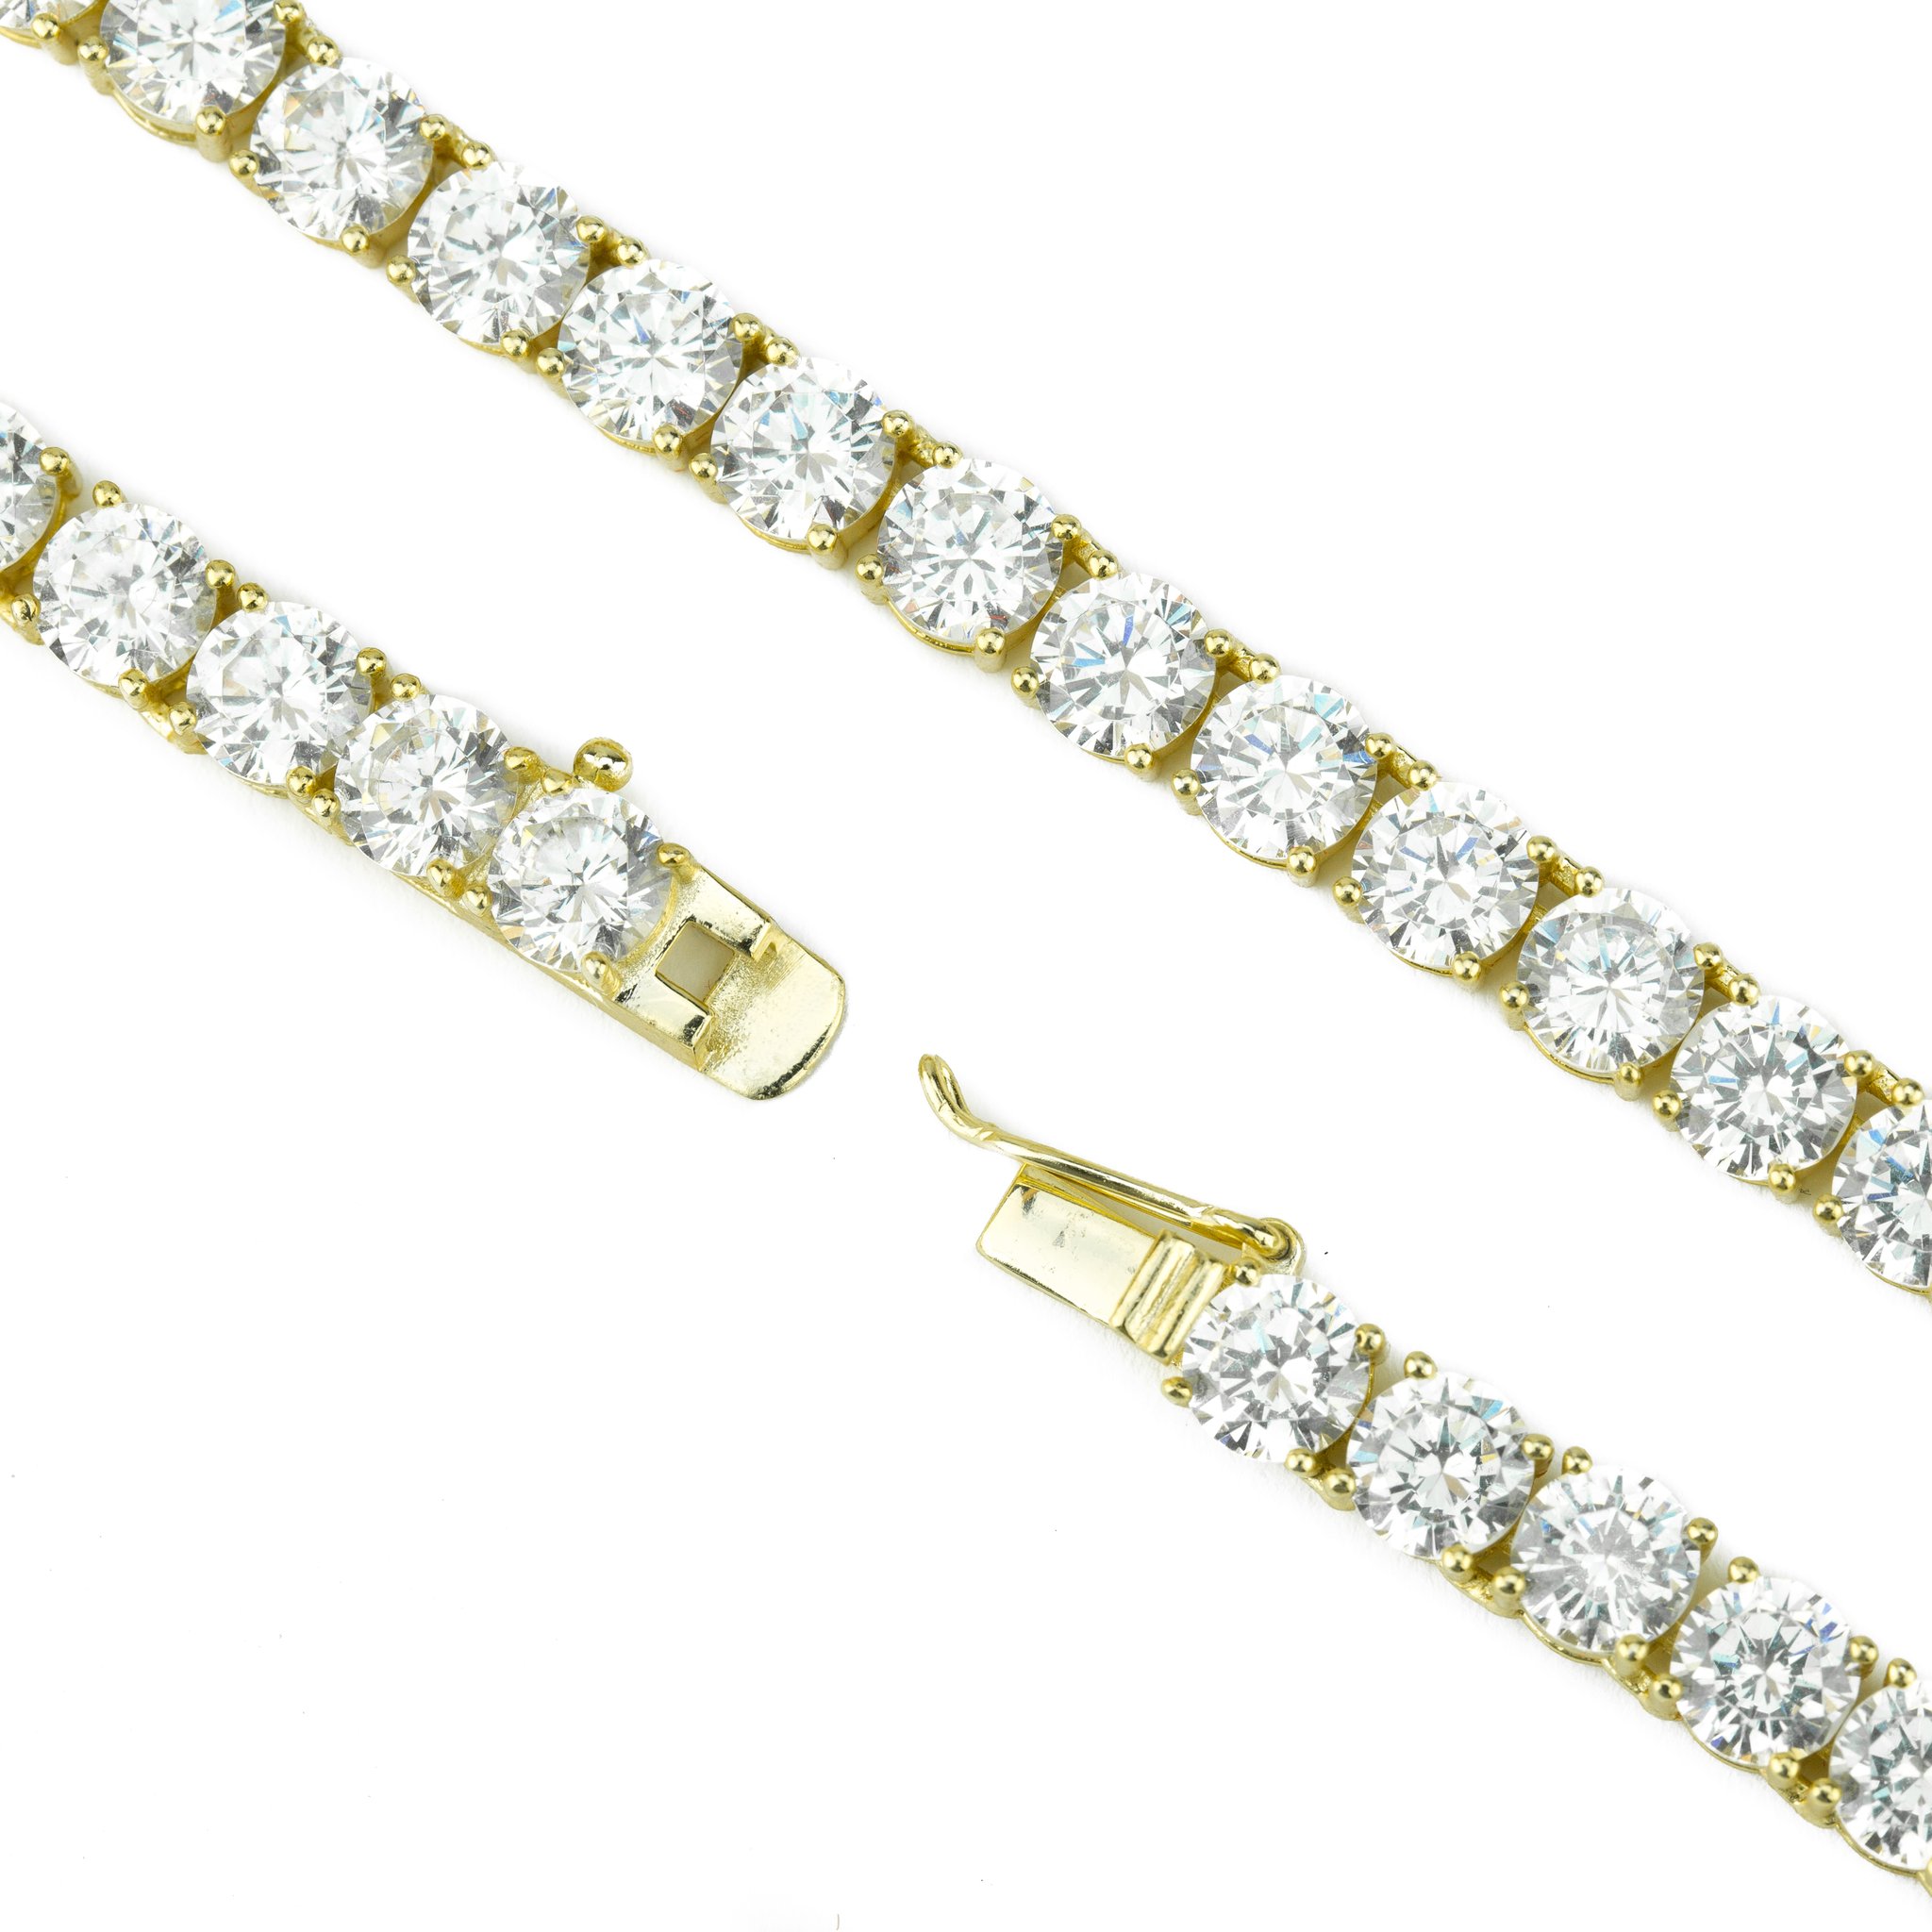 4mm Diamond Tennis Chain in Gold - The Gold Gods Jewelry